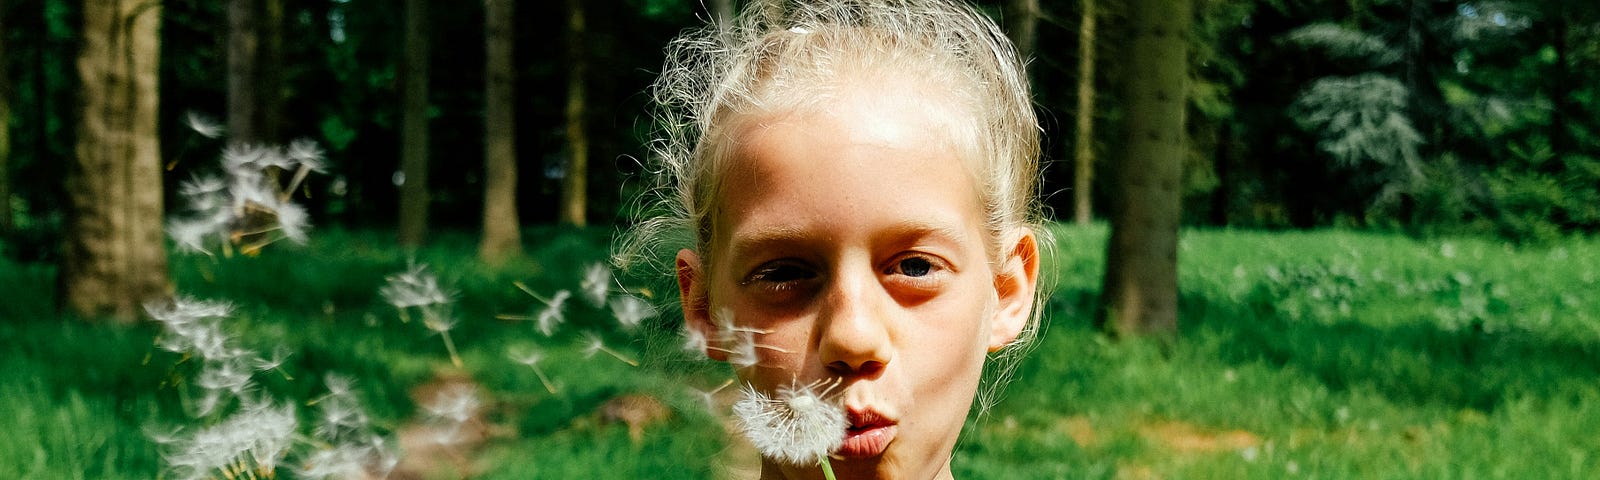 Young girl blowing on a dandelion clock in front of a forest